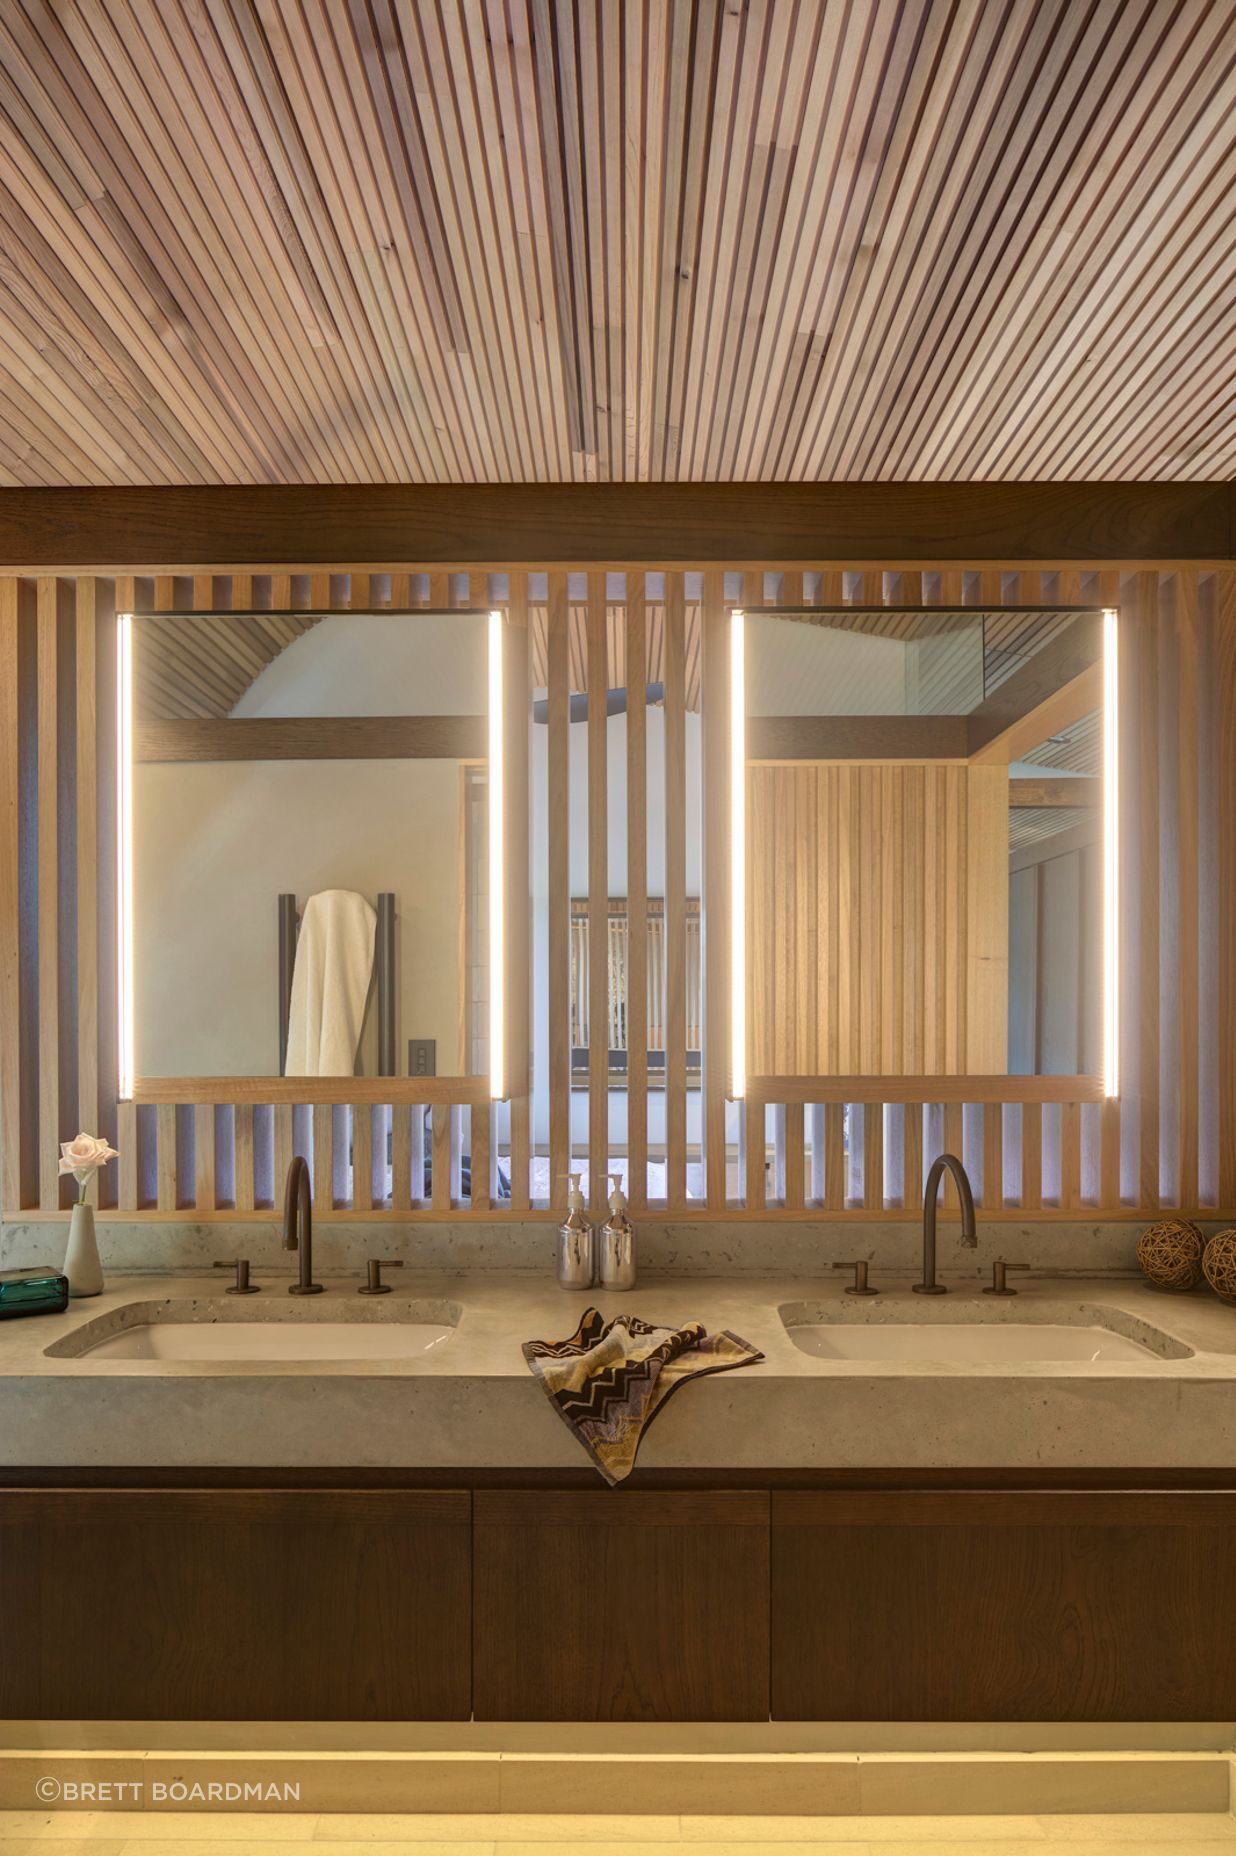 The face-level bathroom lighting mimics the timber battens.